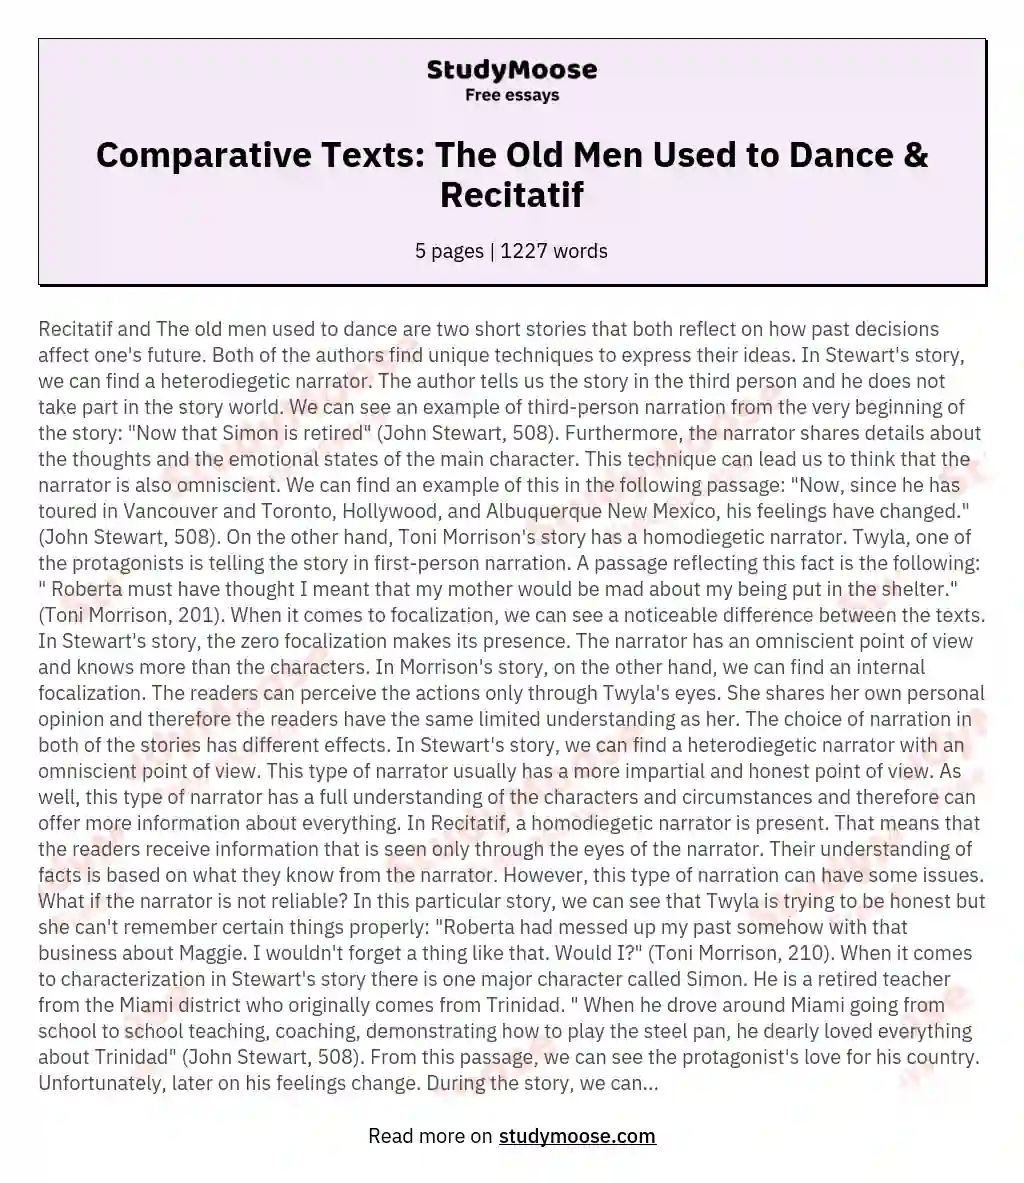 Comparative Texts: The Old Men Used to Dance & Recitatif essay